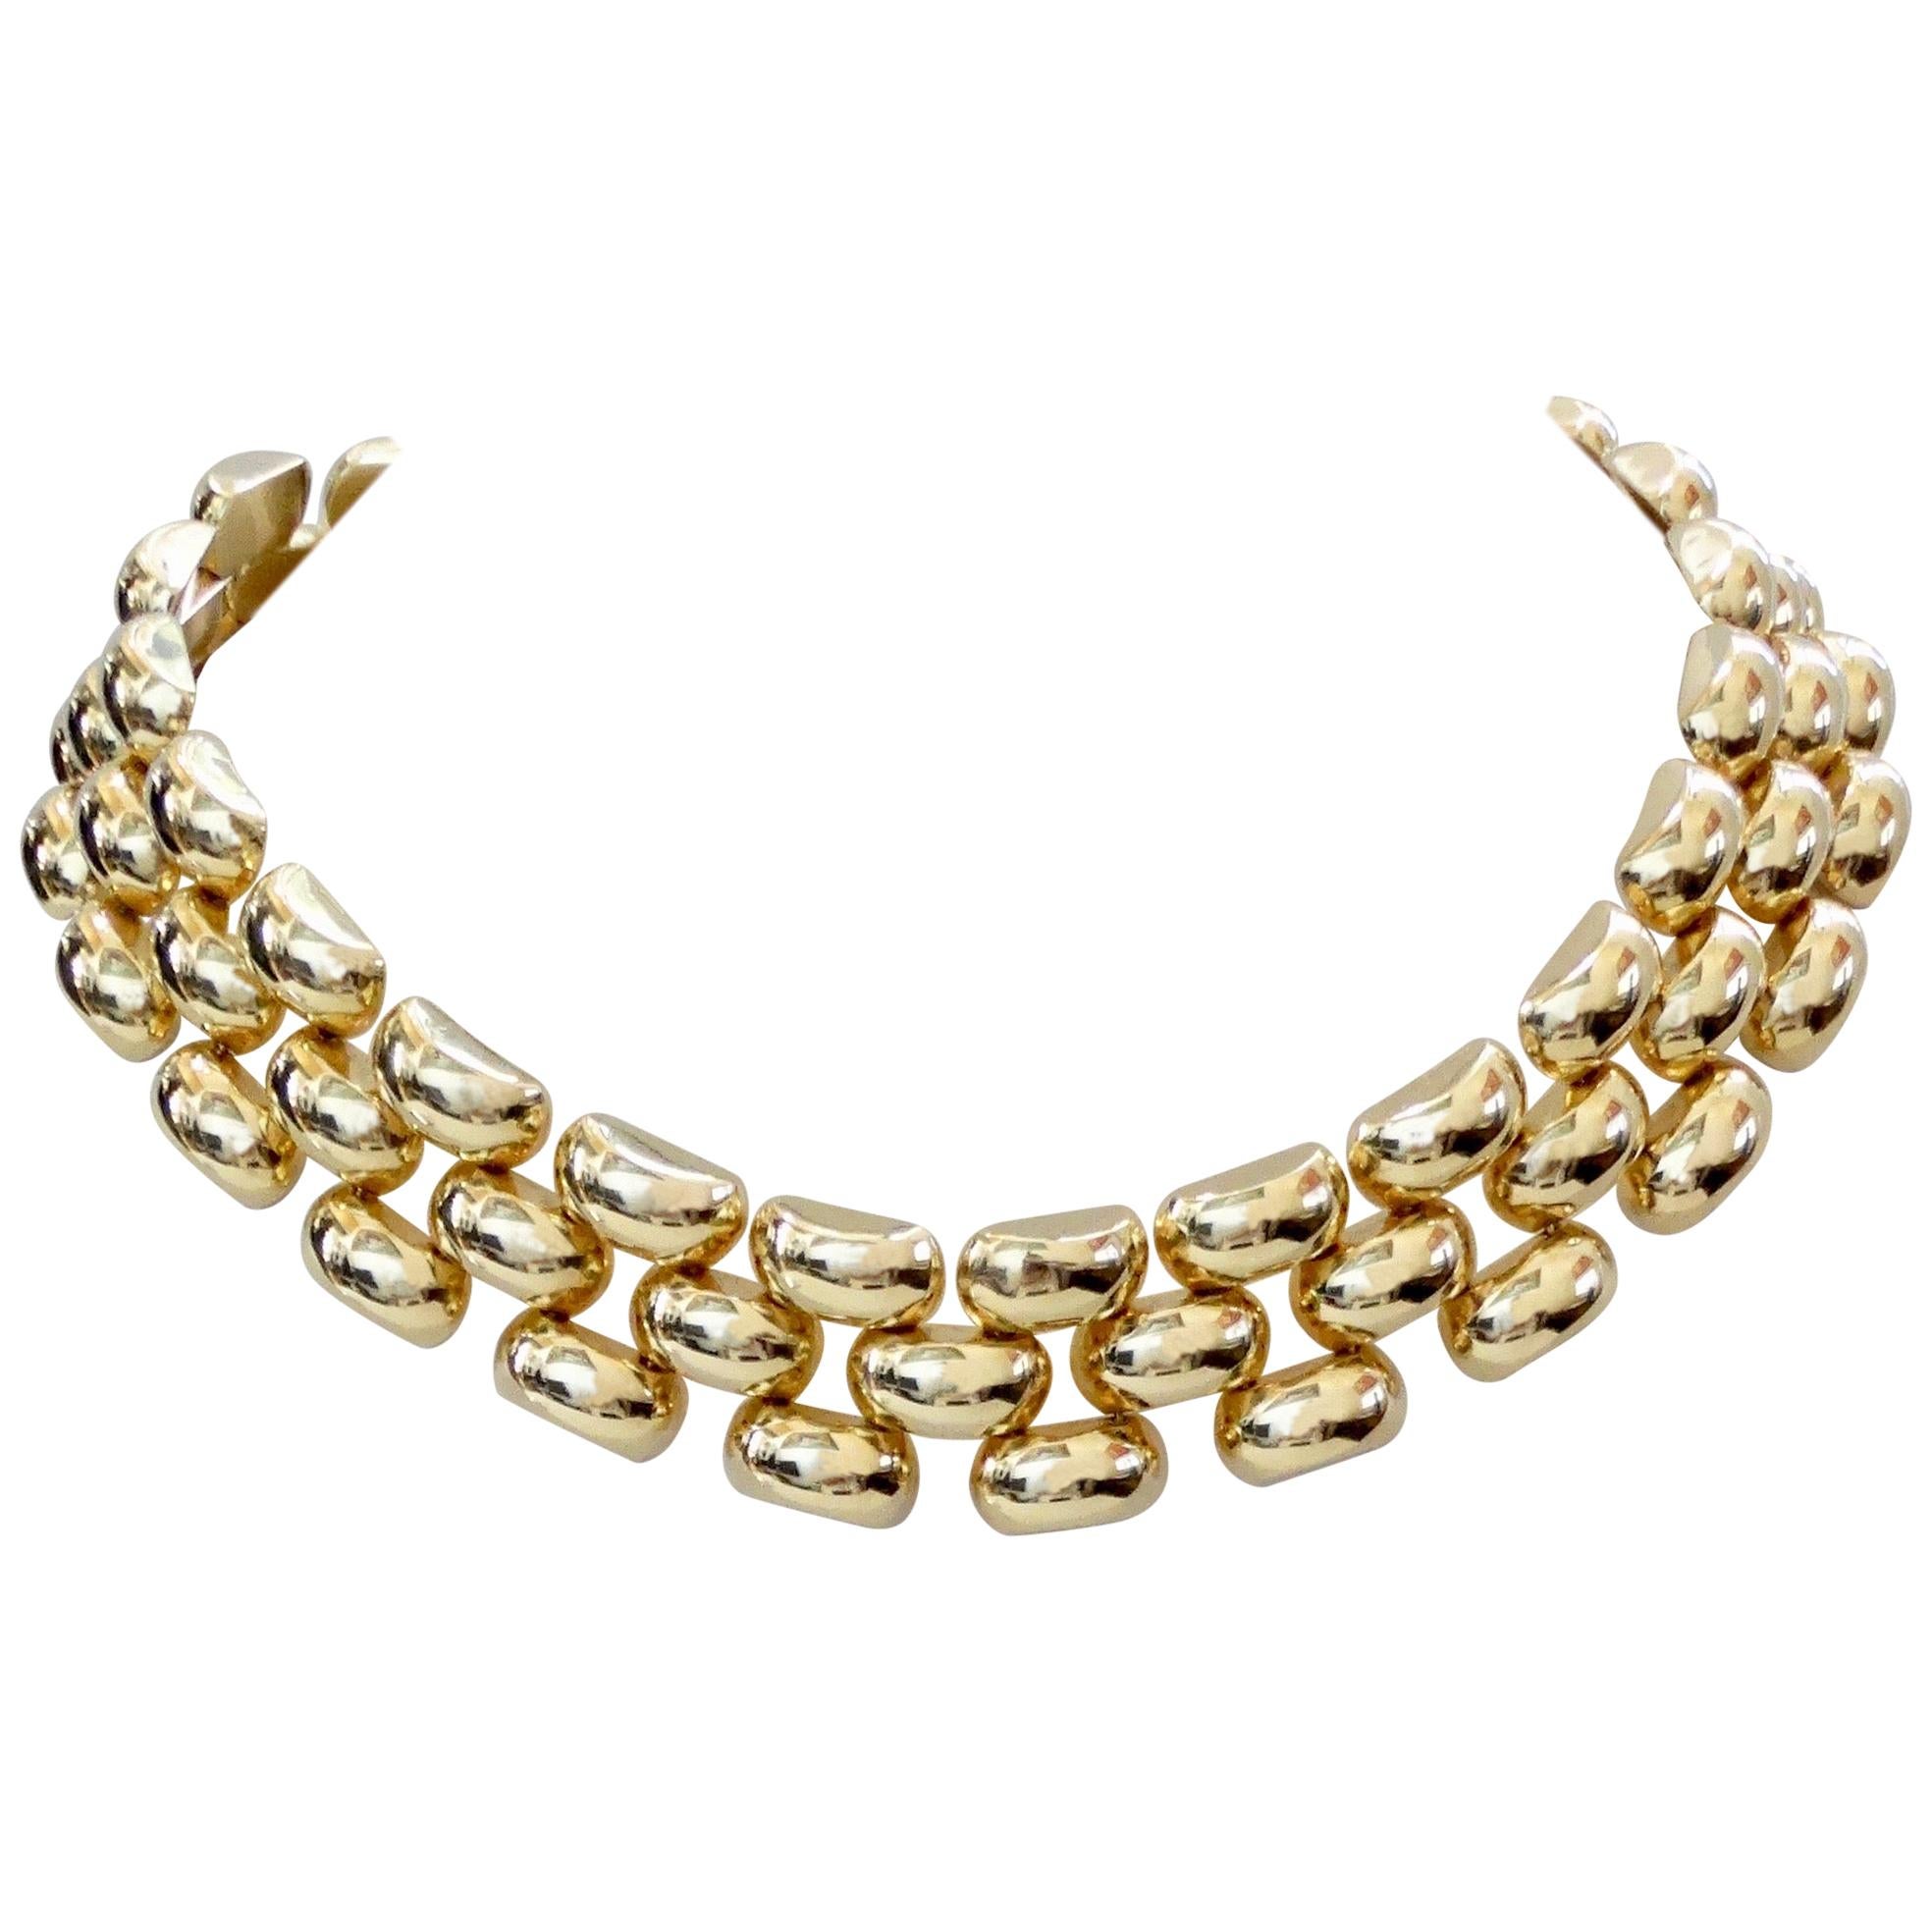  Collar Necklace 14k Yellow Gold Flexible Panther Link